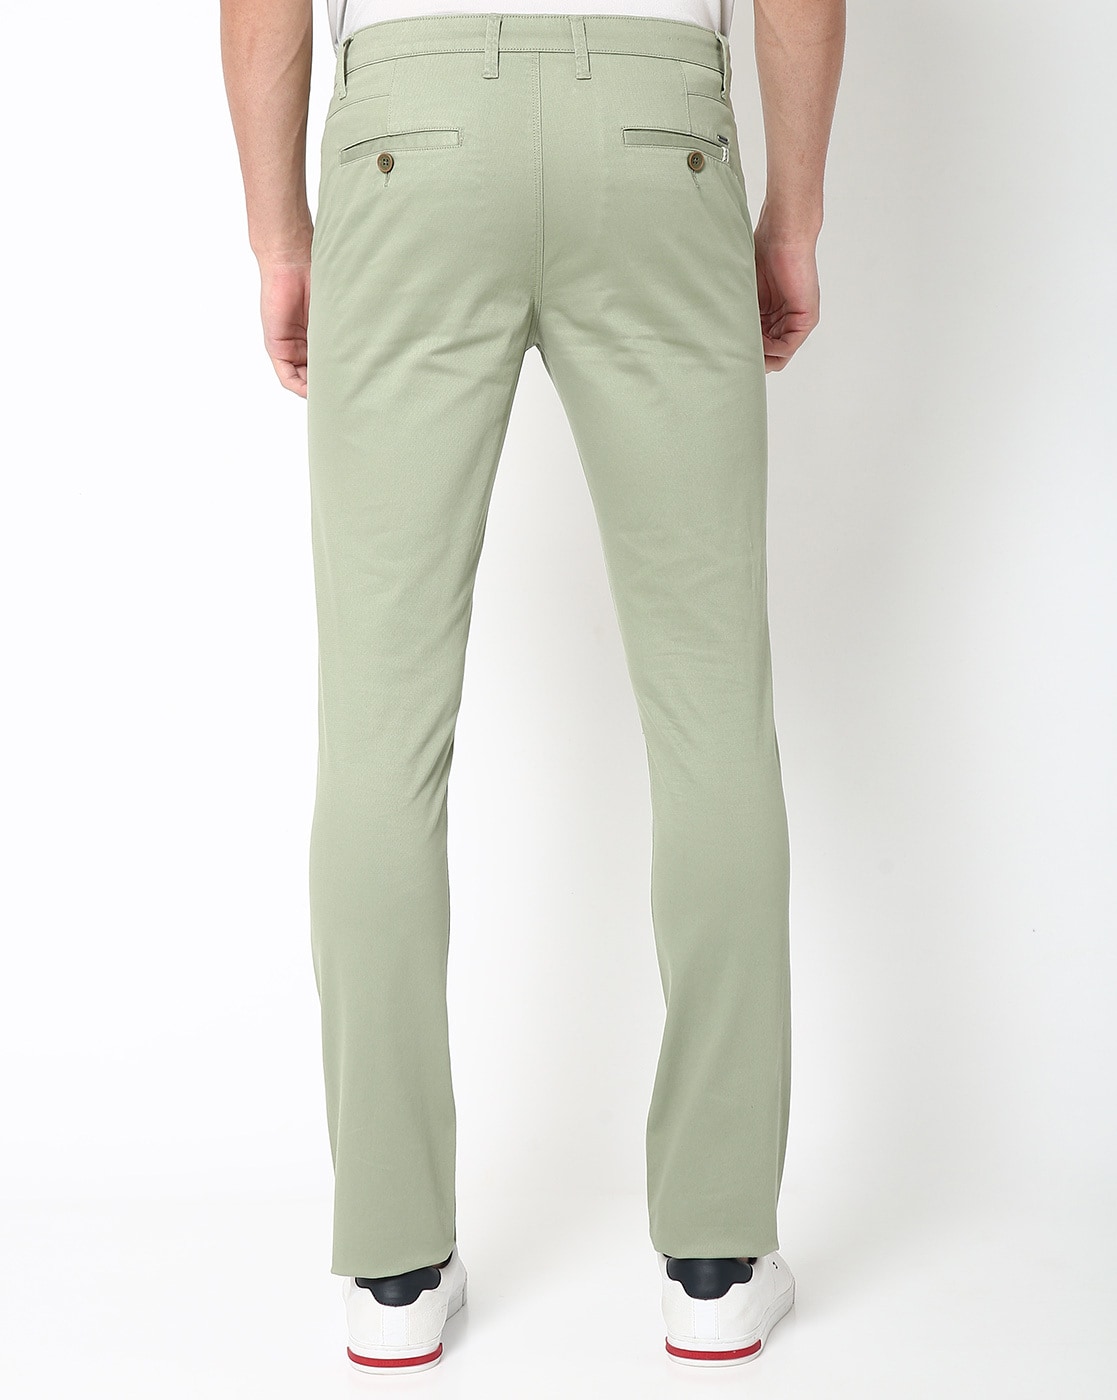 Solid Color Cotton Silk Pant in Olive Green  BJG44